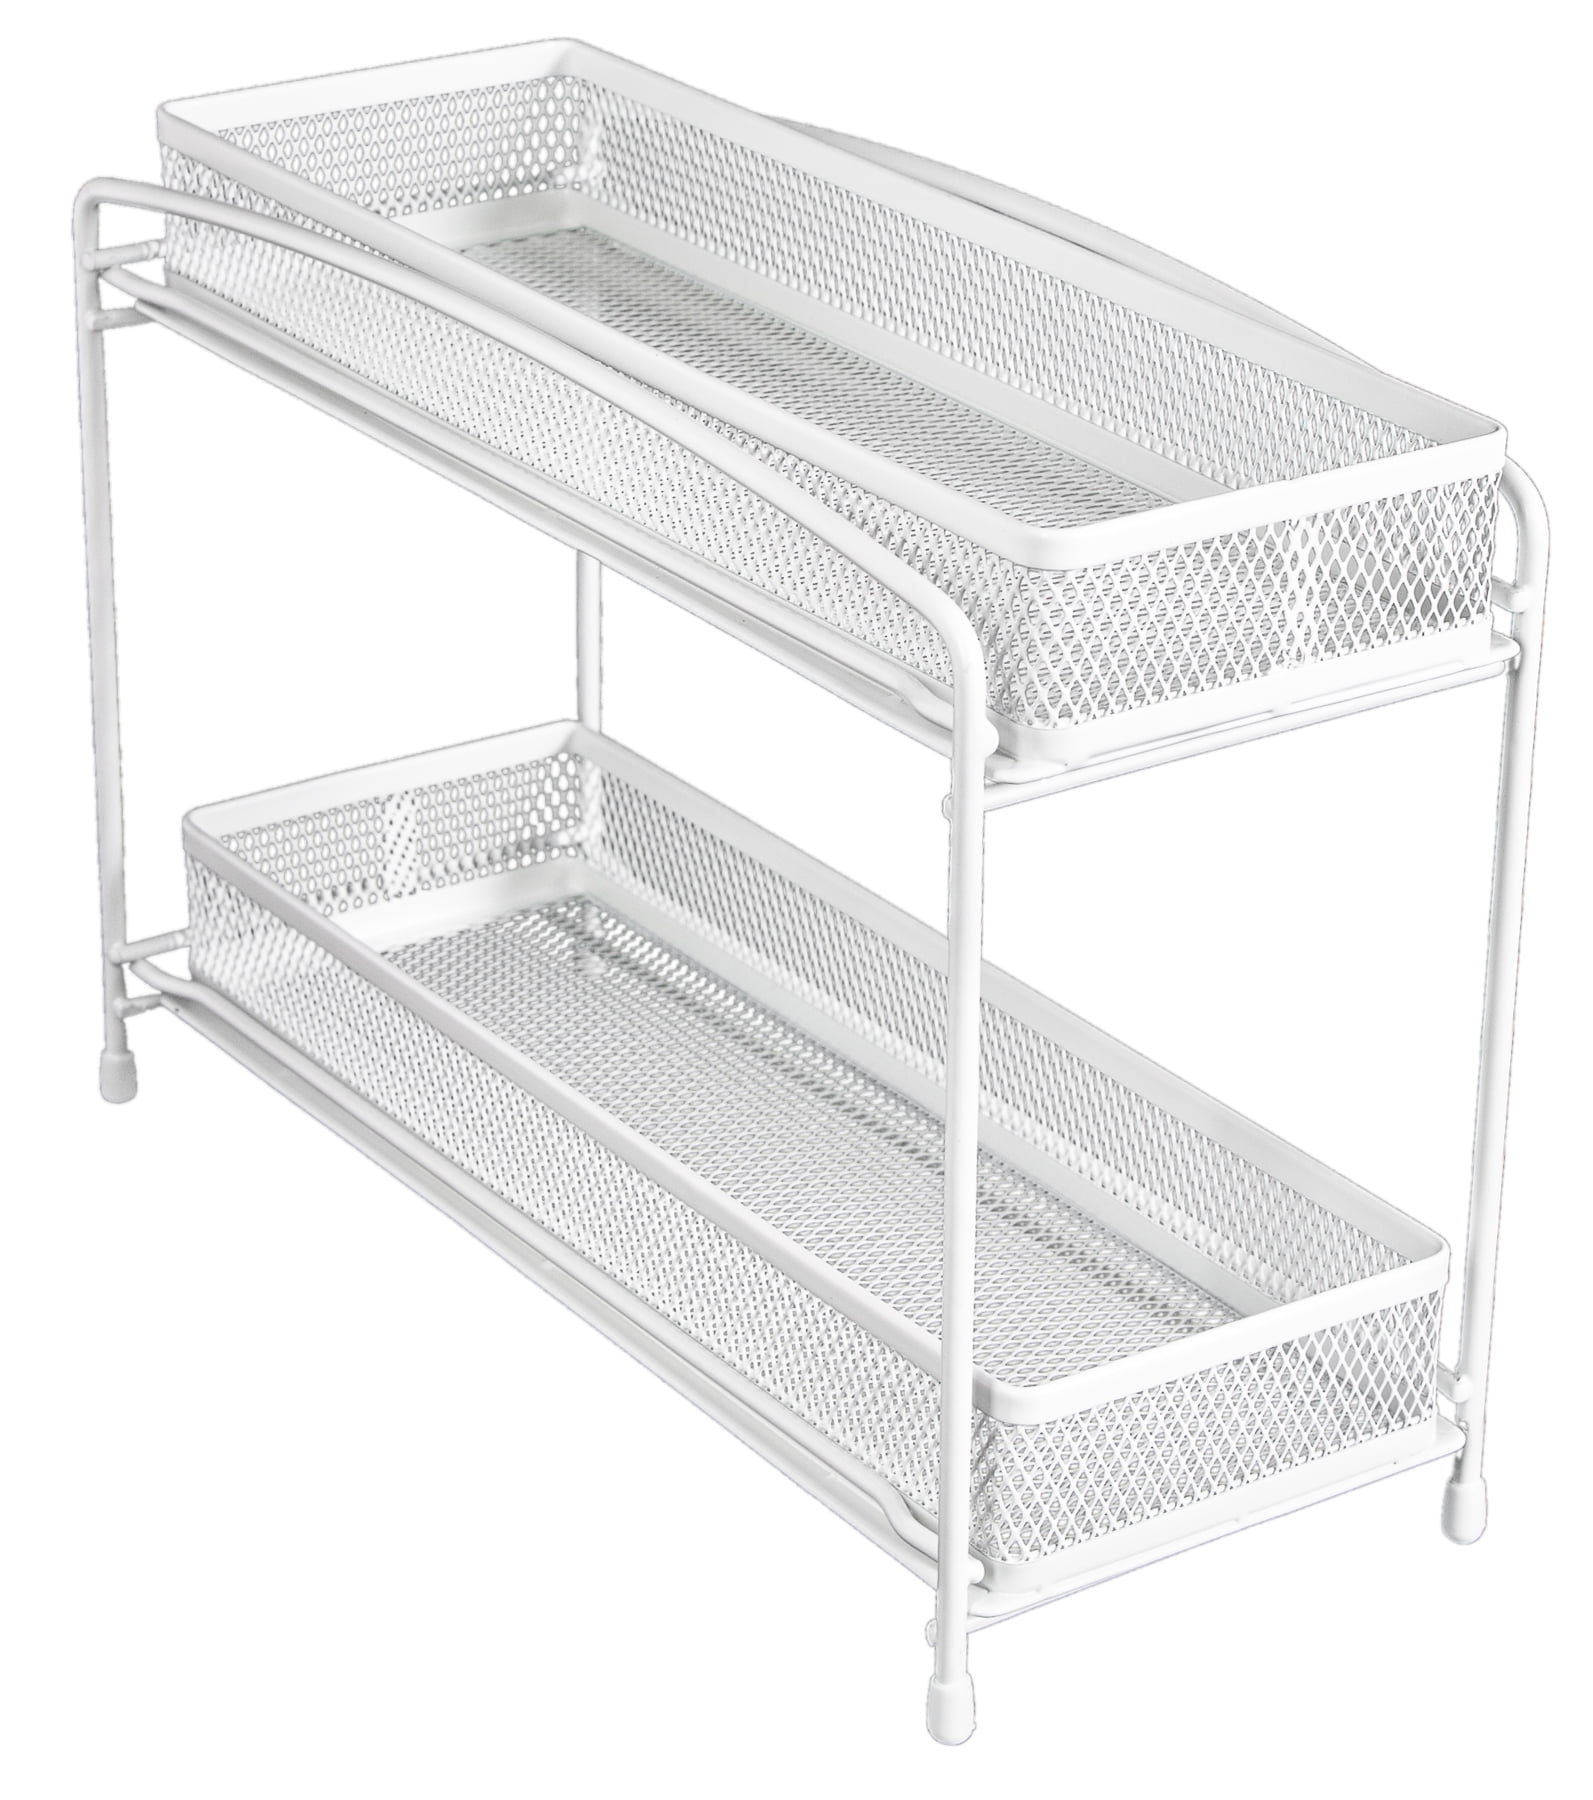  Cabinet Caddy (White, Pull-and-Rotate Spice Rack Organizer, 2  Double-Decker Shelves, Modular Design, Non-Skid Base, Stores  Prescriptions, Essential Oils